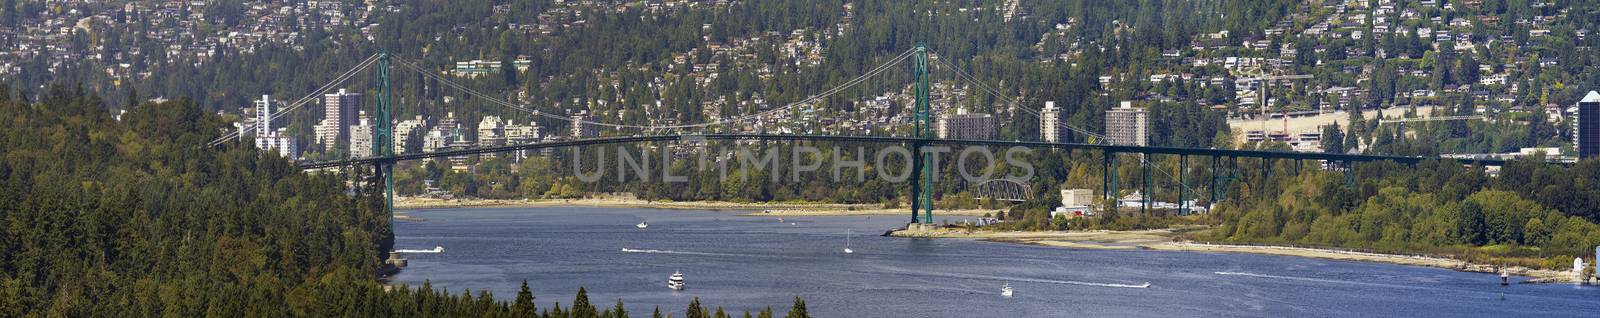 Lions Gate Bridge Over Burrard Inlet in Vancouver BC Canada Panorama